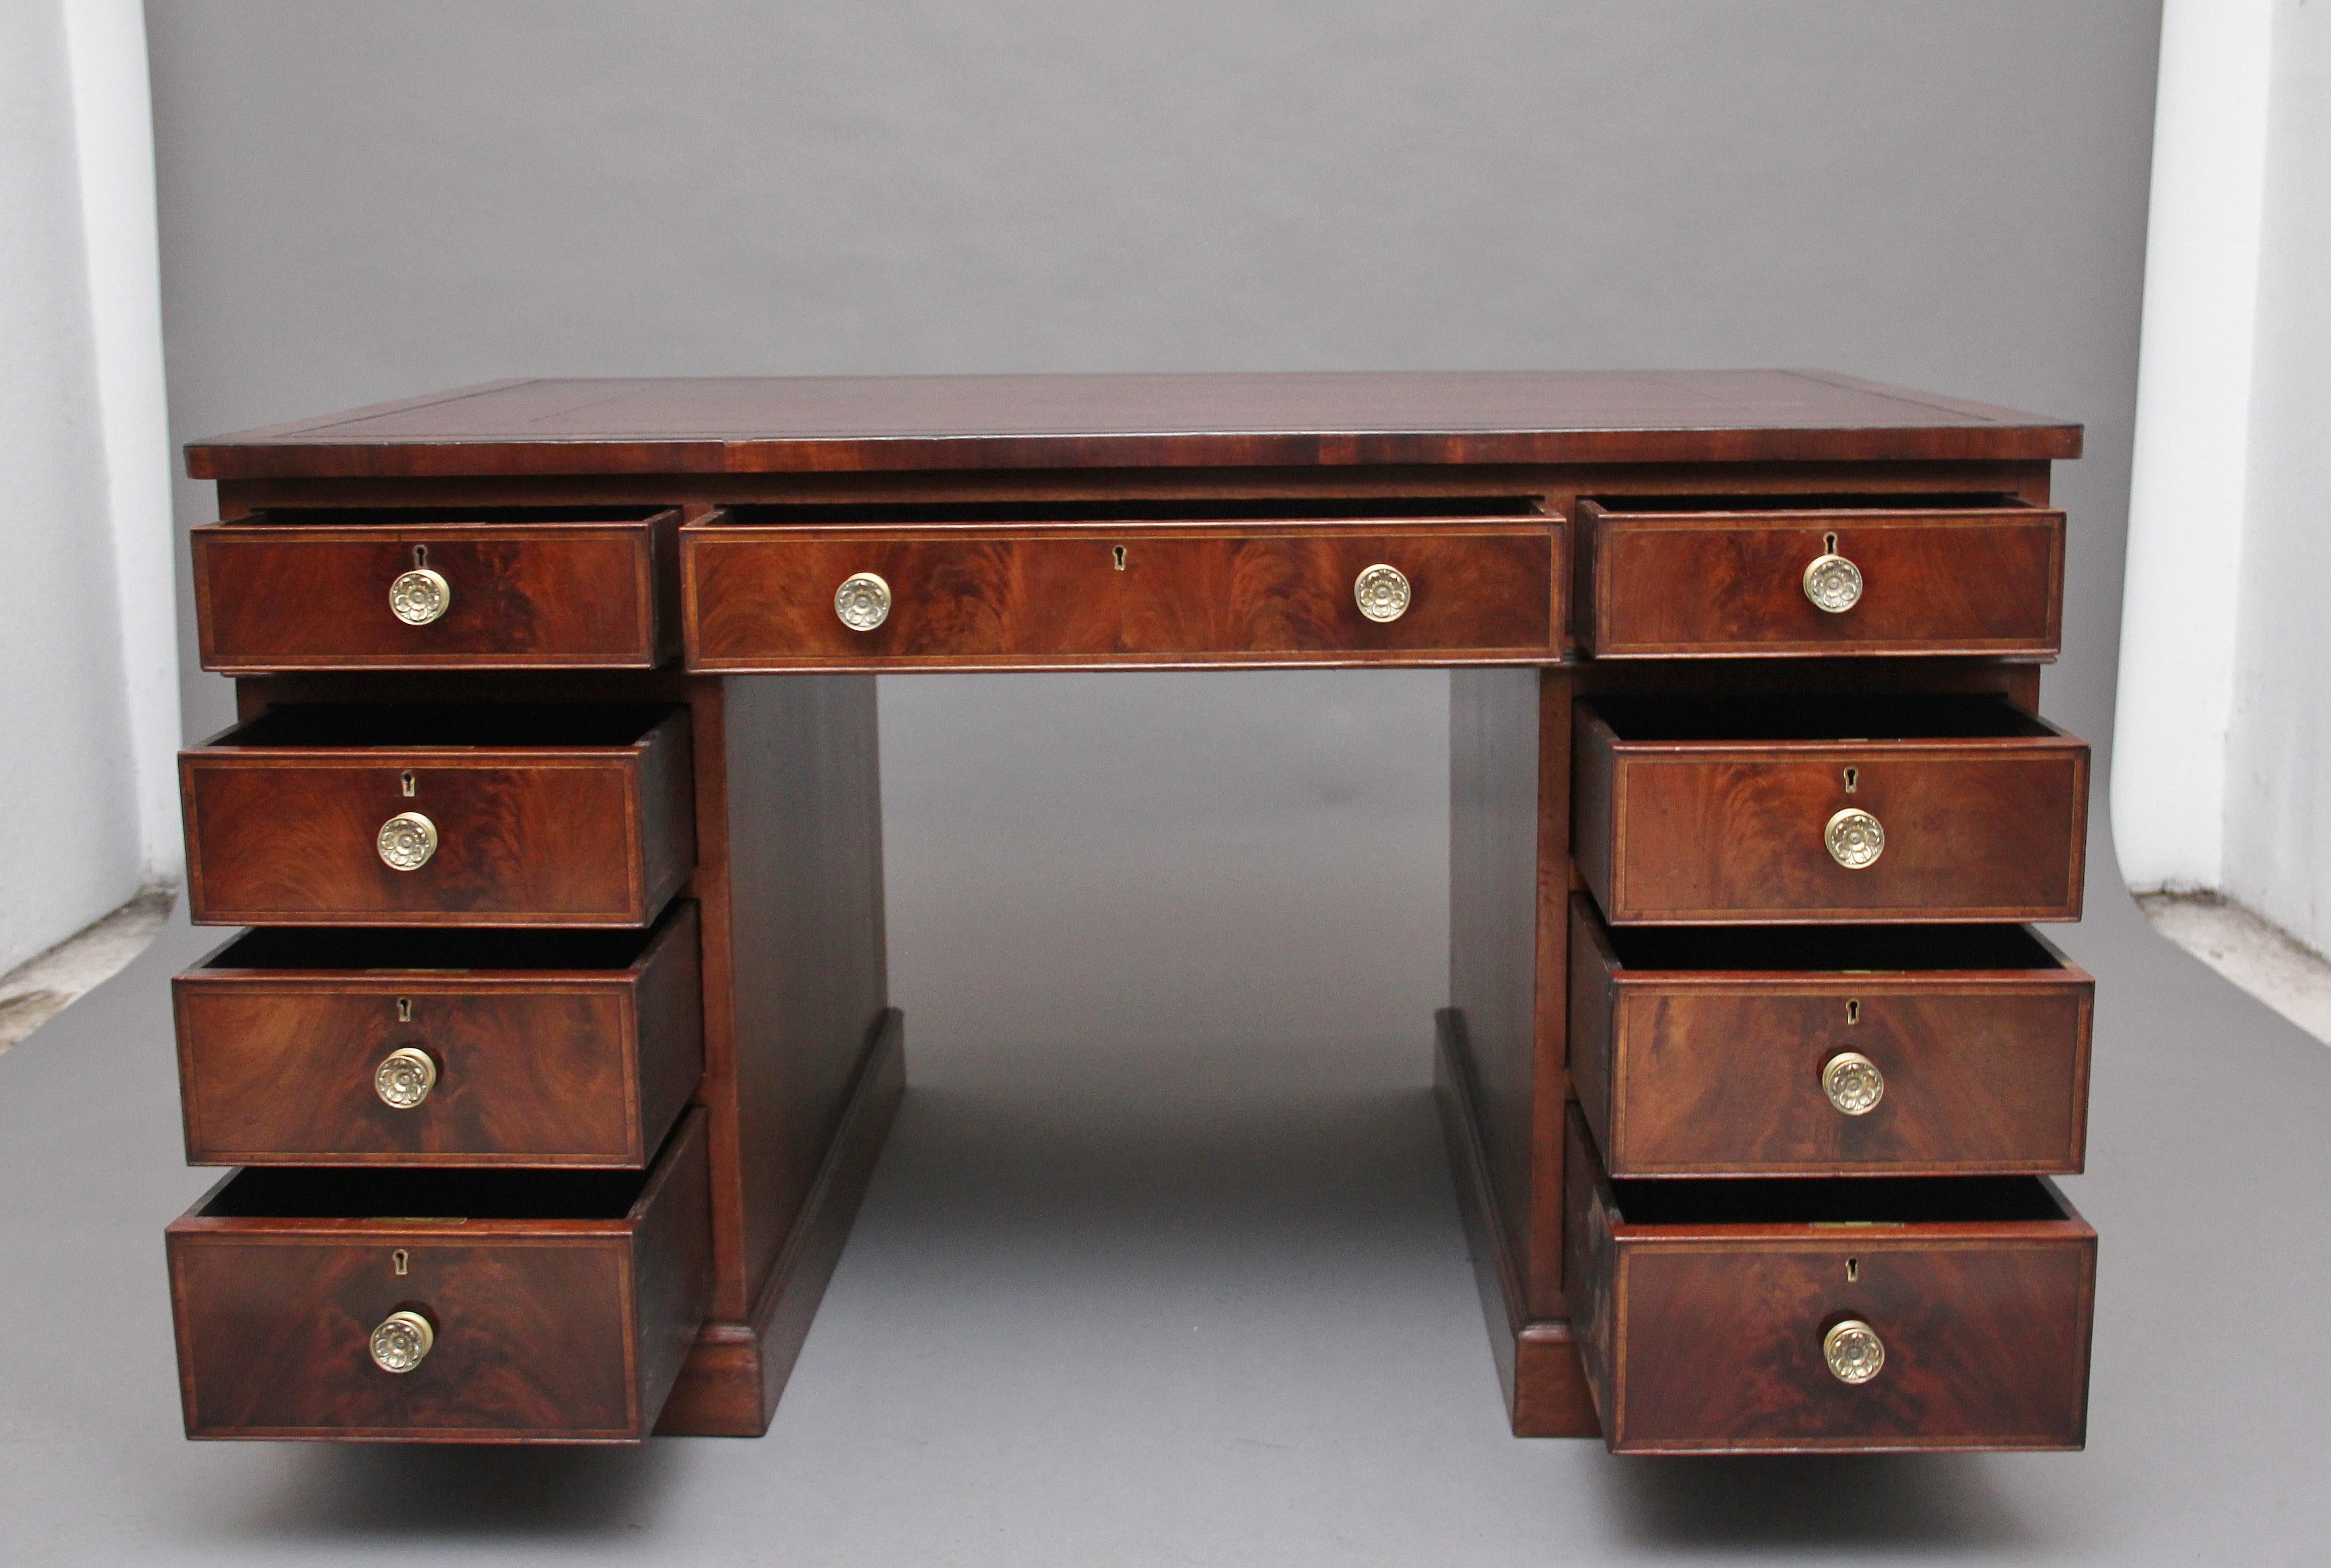 Early 20th century mahogany twin pedestal partners desk, the top having a tan brown leather writing surface decorated with gold and blind tooling, the front of the desk having an arrangement of nine graduated, oak lined drawers with engraved brass